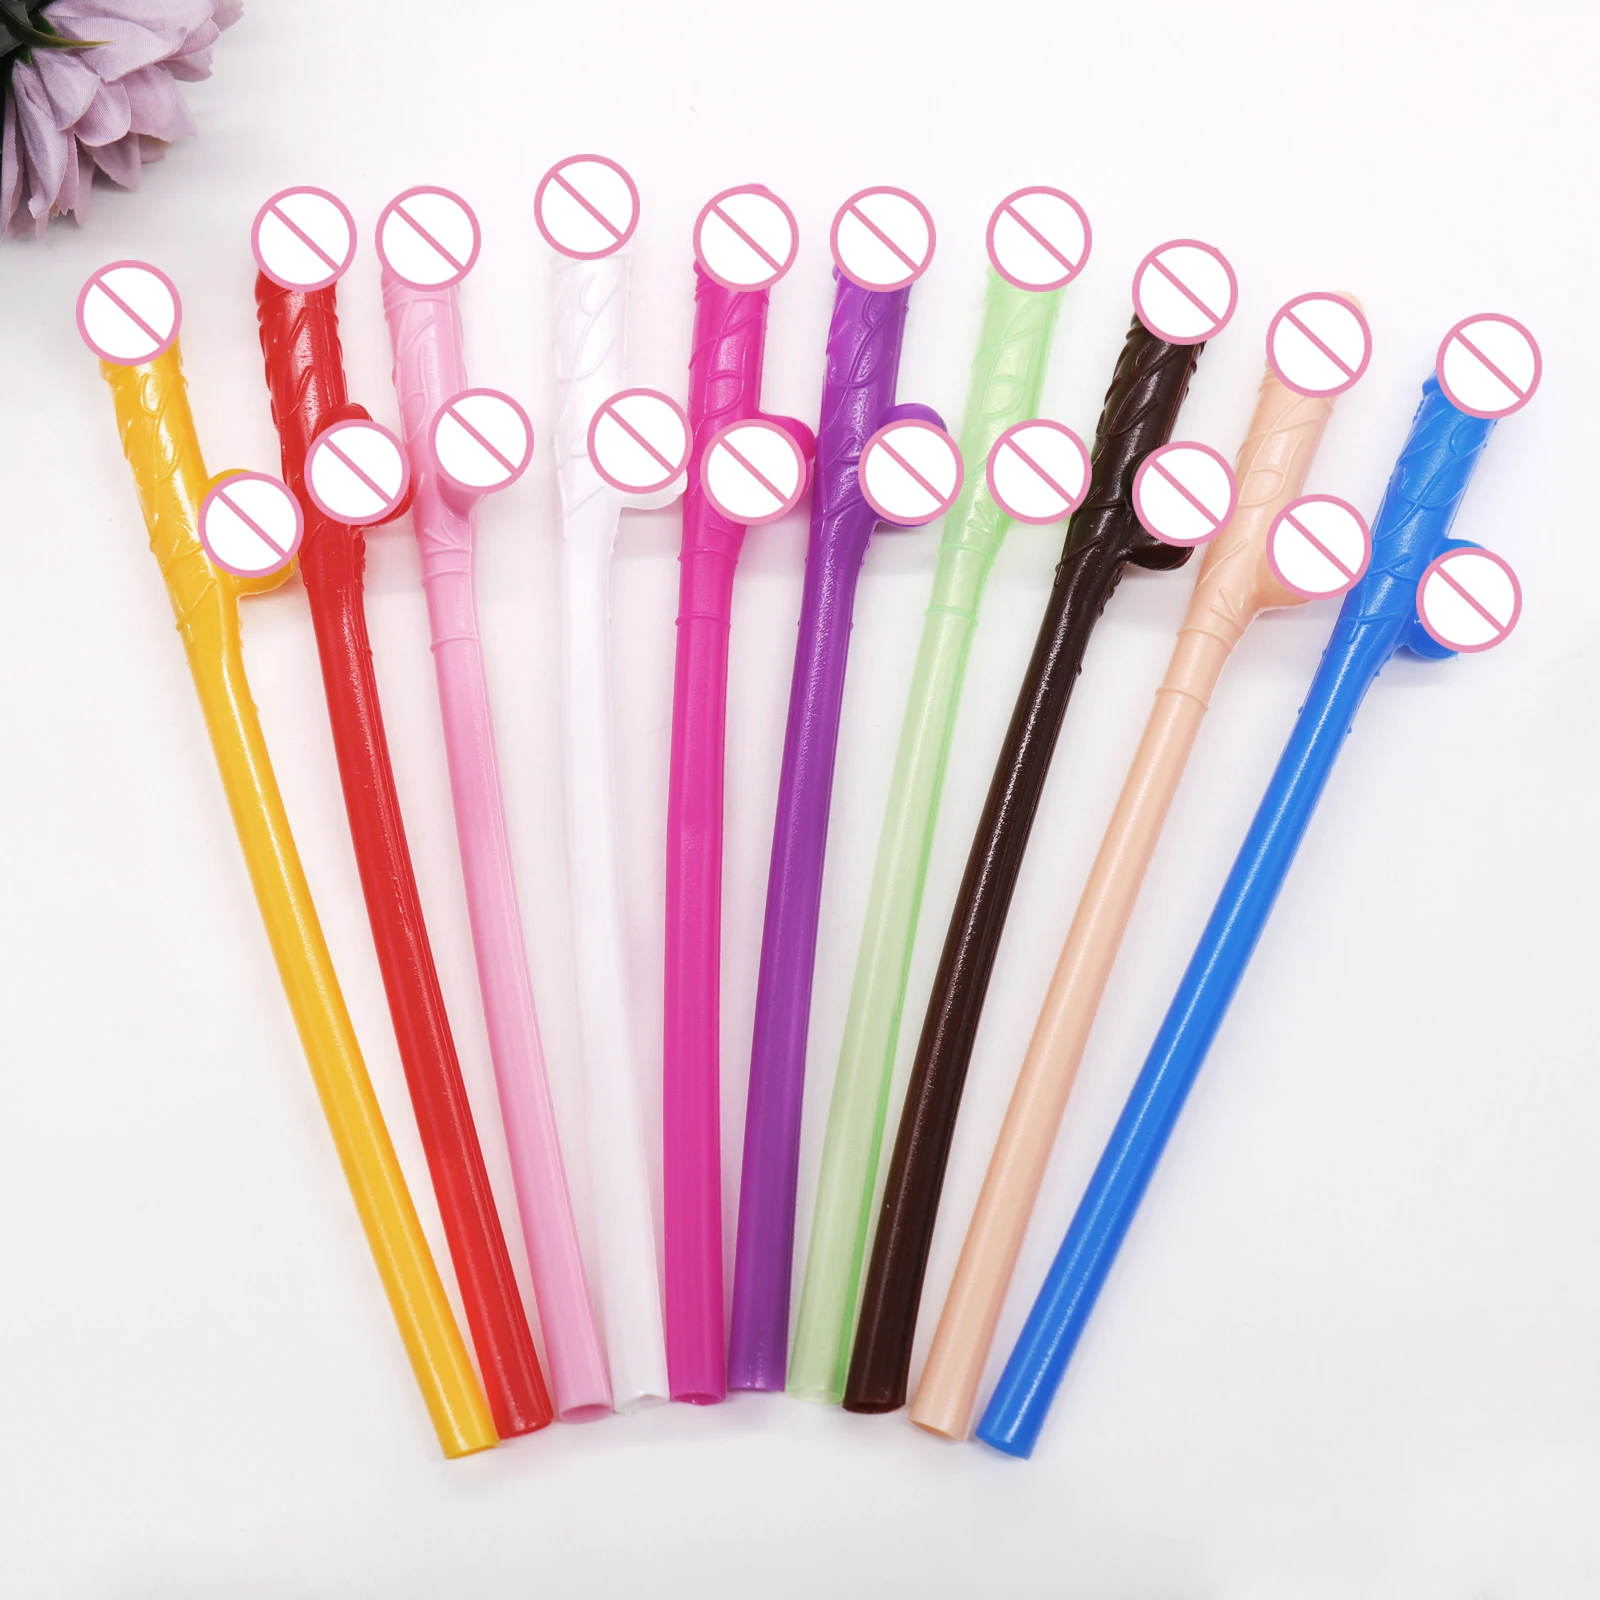 LADIES HEN PARTY NIGHT NOVELTY DICKY STRAW ACCESSORY WILLY STRAWS X 40 PACK 